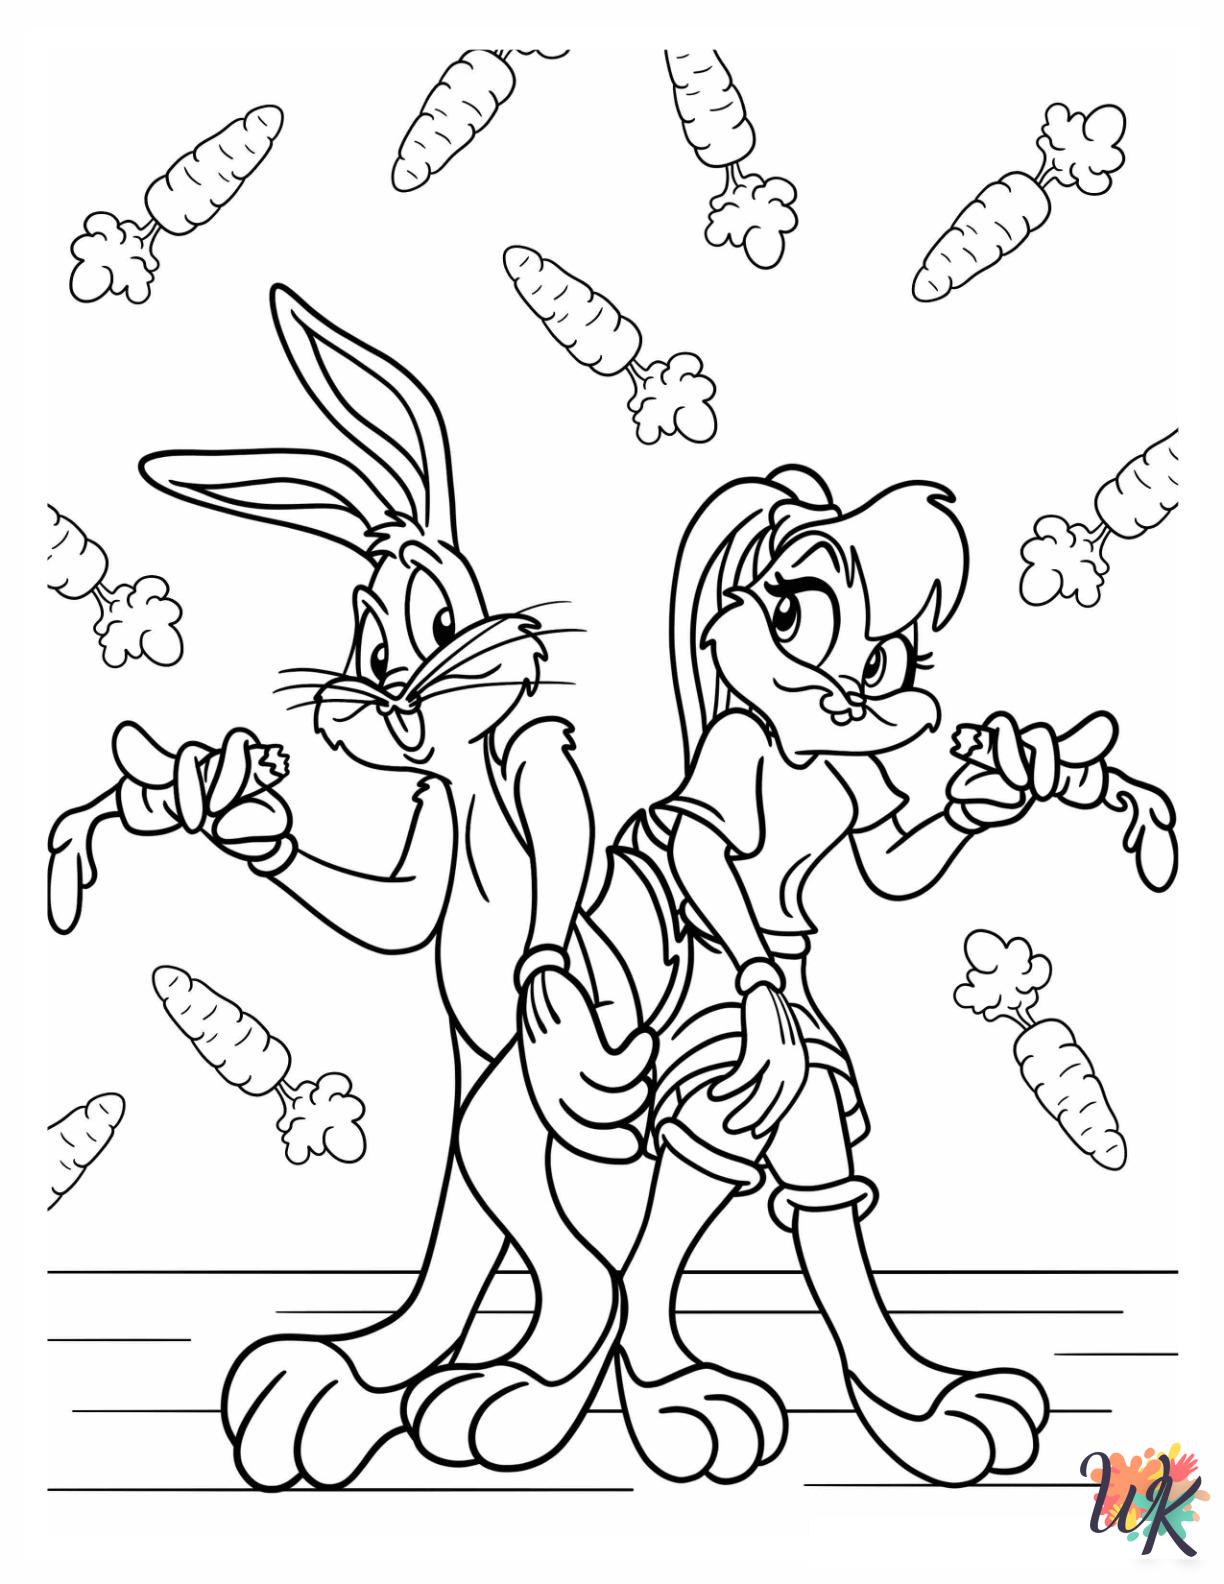 Bugs Bunny coloring book pages